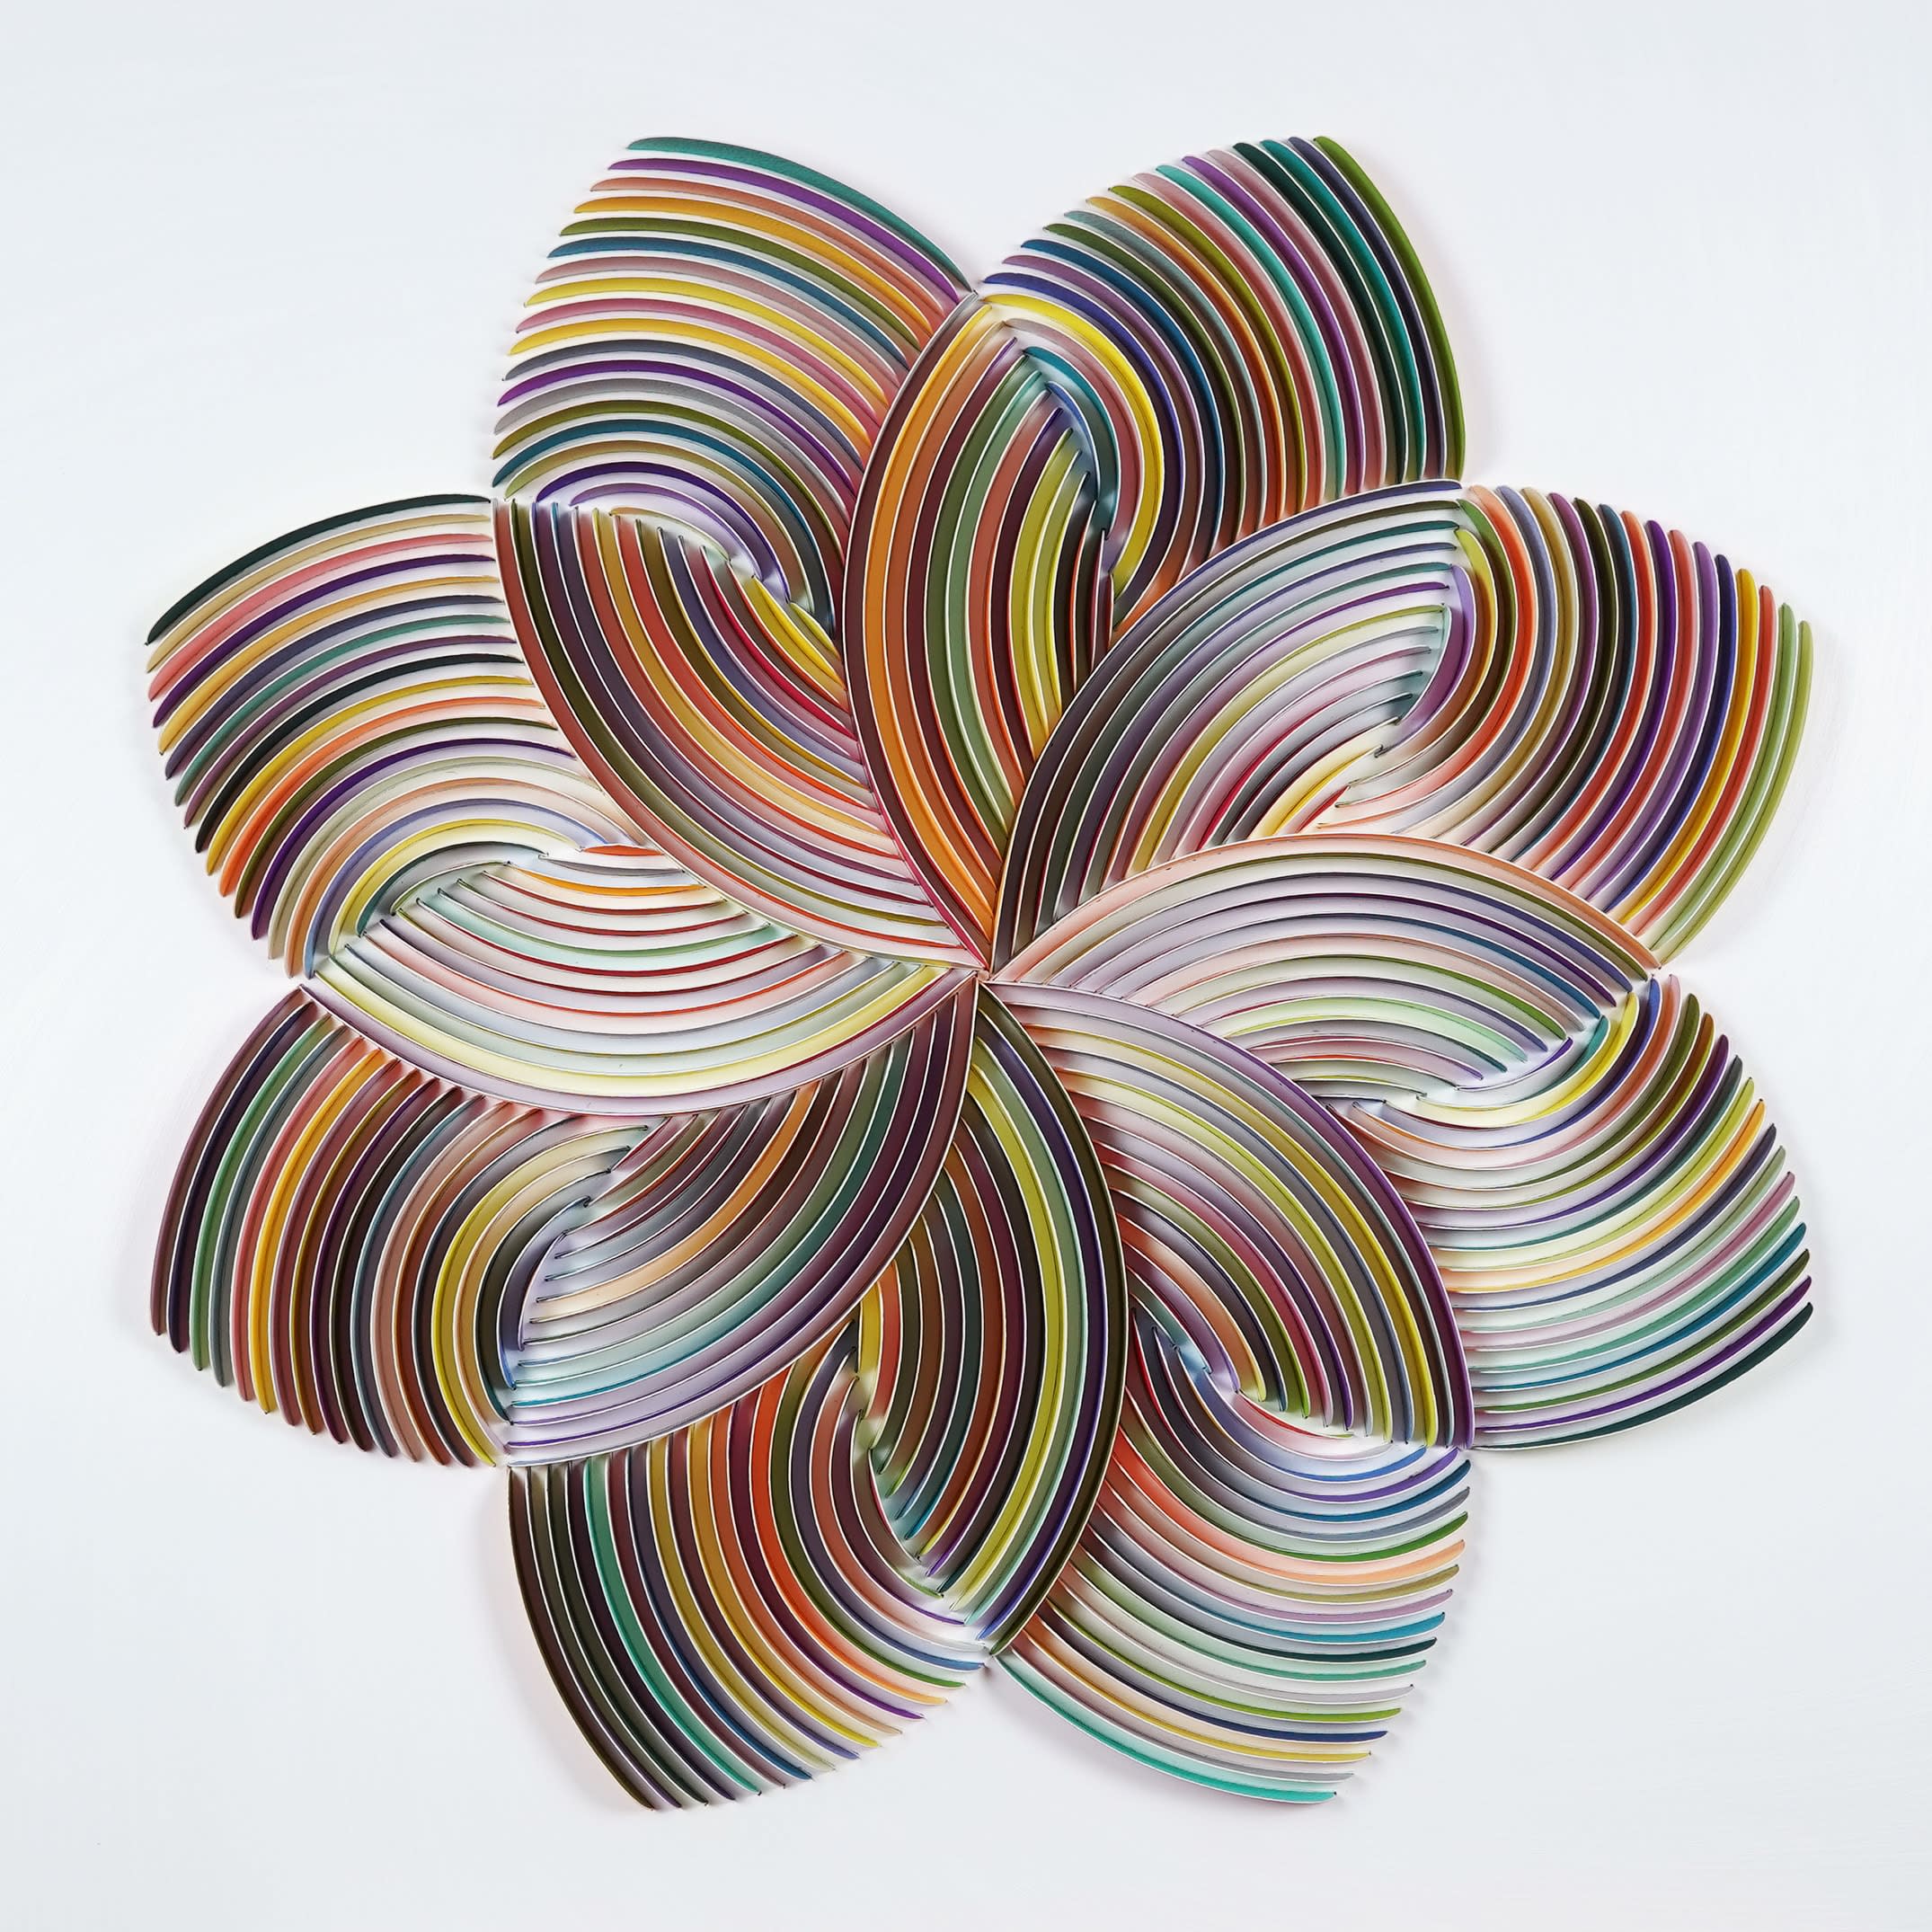 Peter Monaghan: Floret 16 points, Mixed Media, 27 1/2 x 27 1/2 in, 70 x 70 cm | Peter Monaghan: Perspectives | Thursday 18 April – Tuesday 7 May 2024 | Gormleys Fine Art, Dublin | Image: Peter Monaghan: Floret 16 points, Mixed Media, 27 1/2 x 27 1/2 in, 70 x 70 cm | probably a work in cut, coloured paper, somewhat 3D; we see a flower shape – 8 petals ,and within that shape another set of eight thinner petals, rotated at 45 degrees to the first set; each petal is a series of parallel, sweeping coloured stripes 